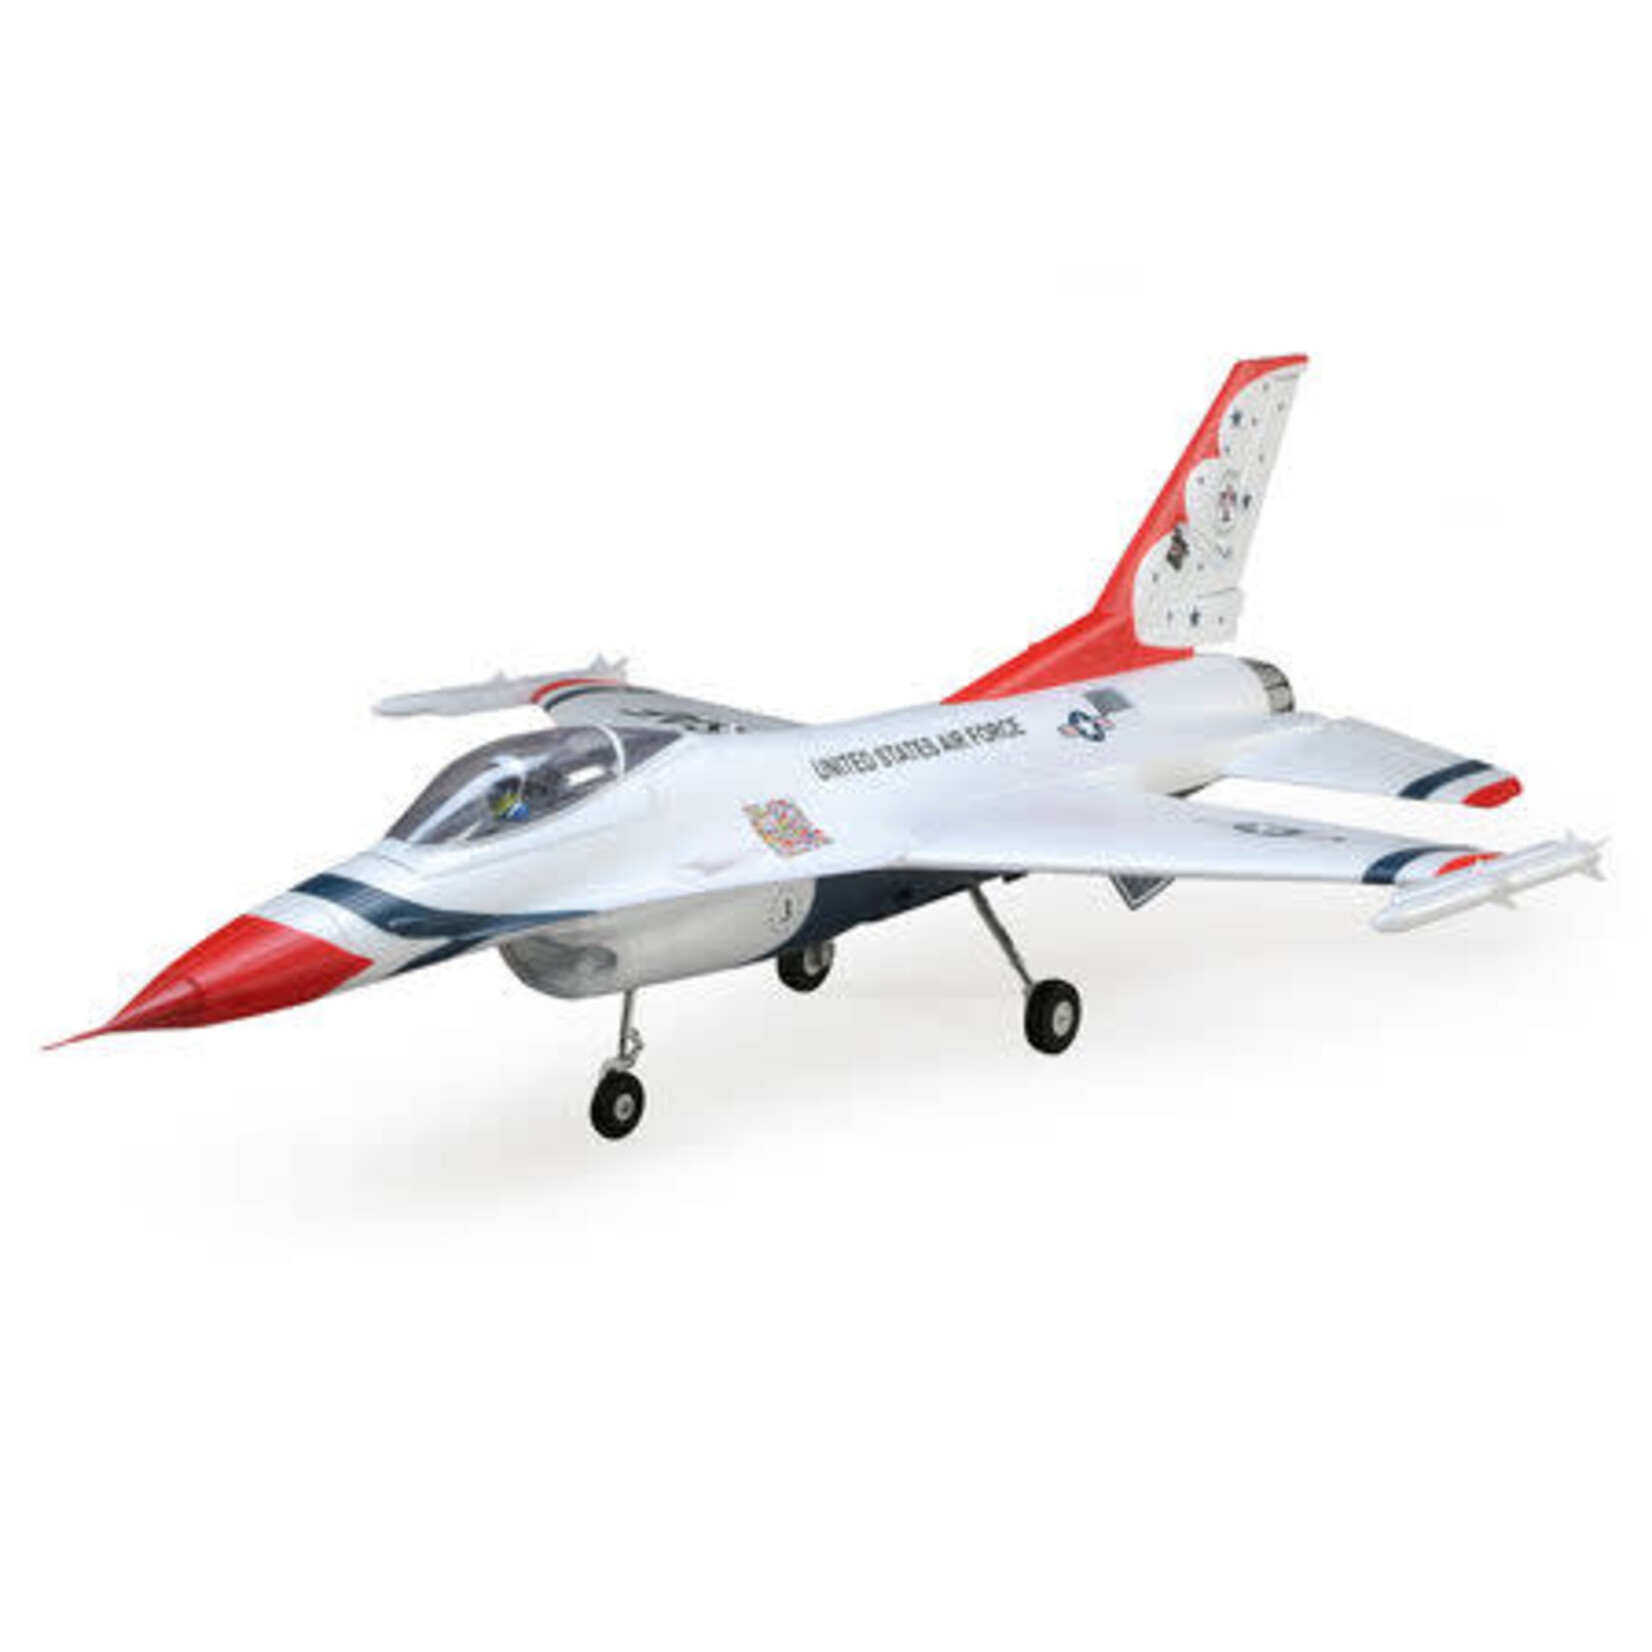 Eflite EFL78500  F-16 Thunderbirds 70mm EDF Jet BNF Basic with AS3X and SAFE Select